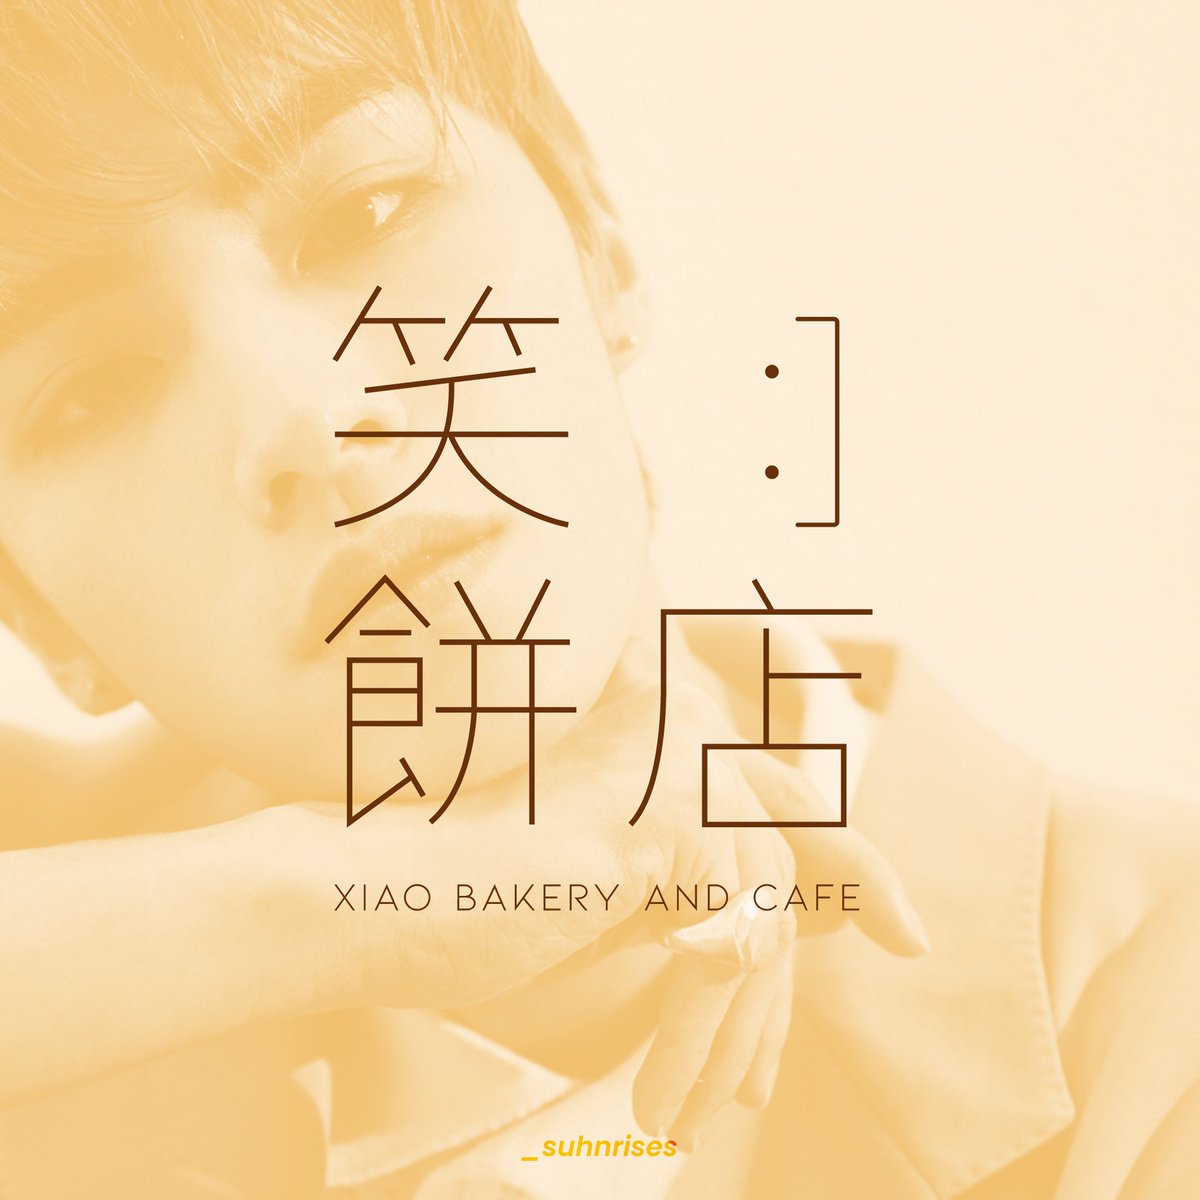 xiaojun: xiao bakery and cafe (笑餅店)- cute lil bakery + cafe (maybe also family owned)- xiao refers to both 肖 (his last name) and 笑 (meaning “smile”) - best egg tarts in ncity i don’t make the rules